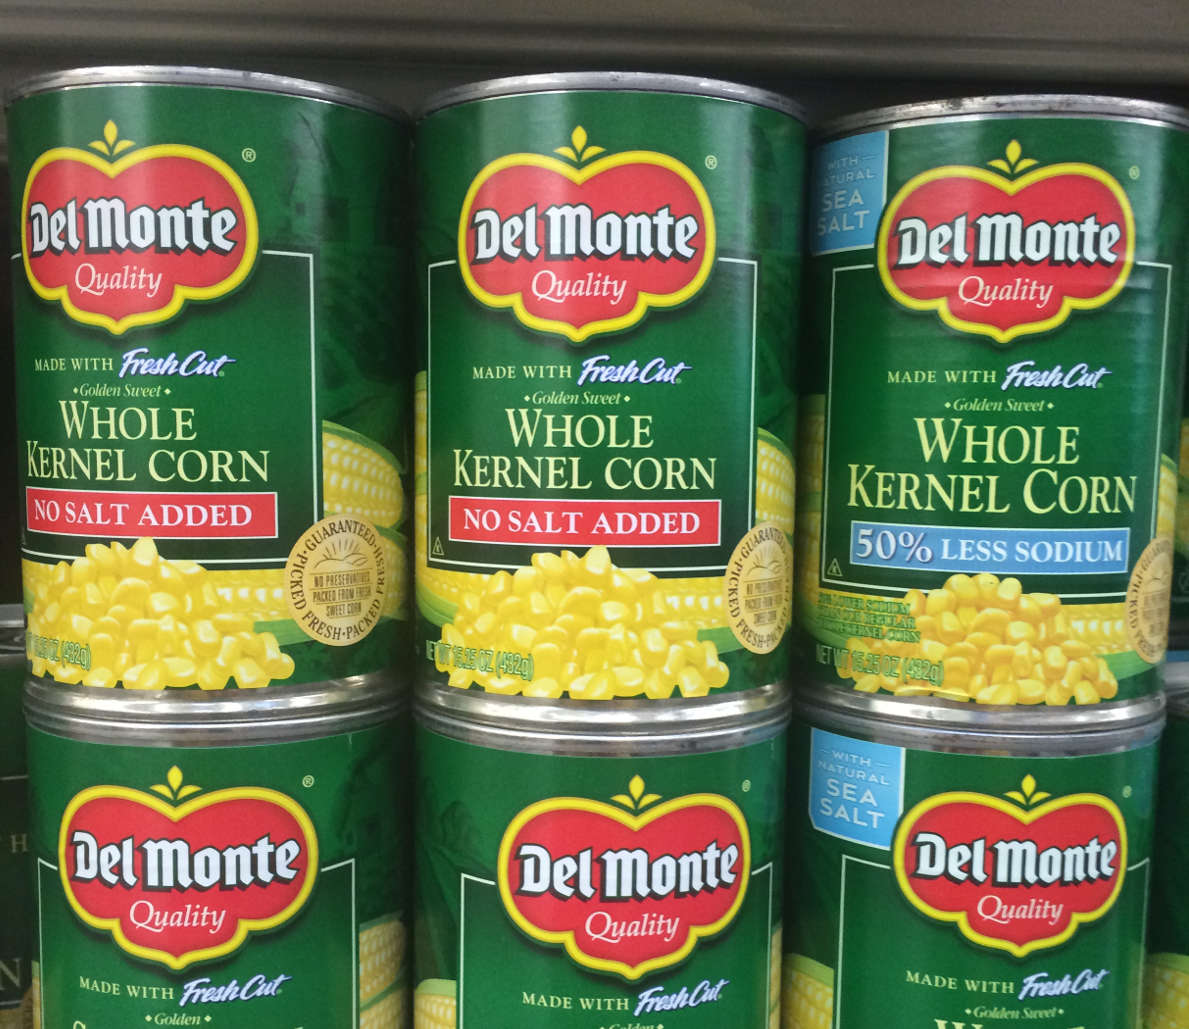 Del Monte sweetcorn canned products